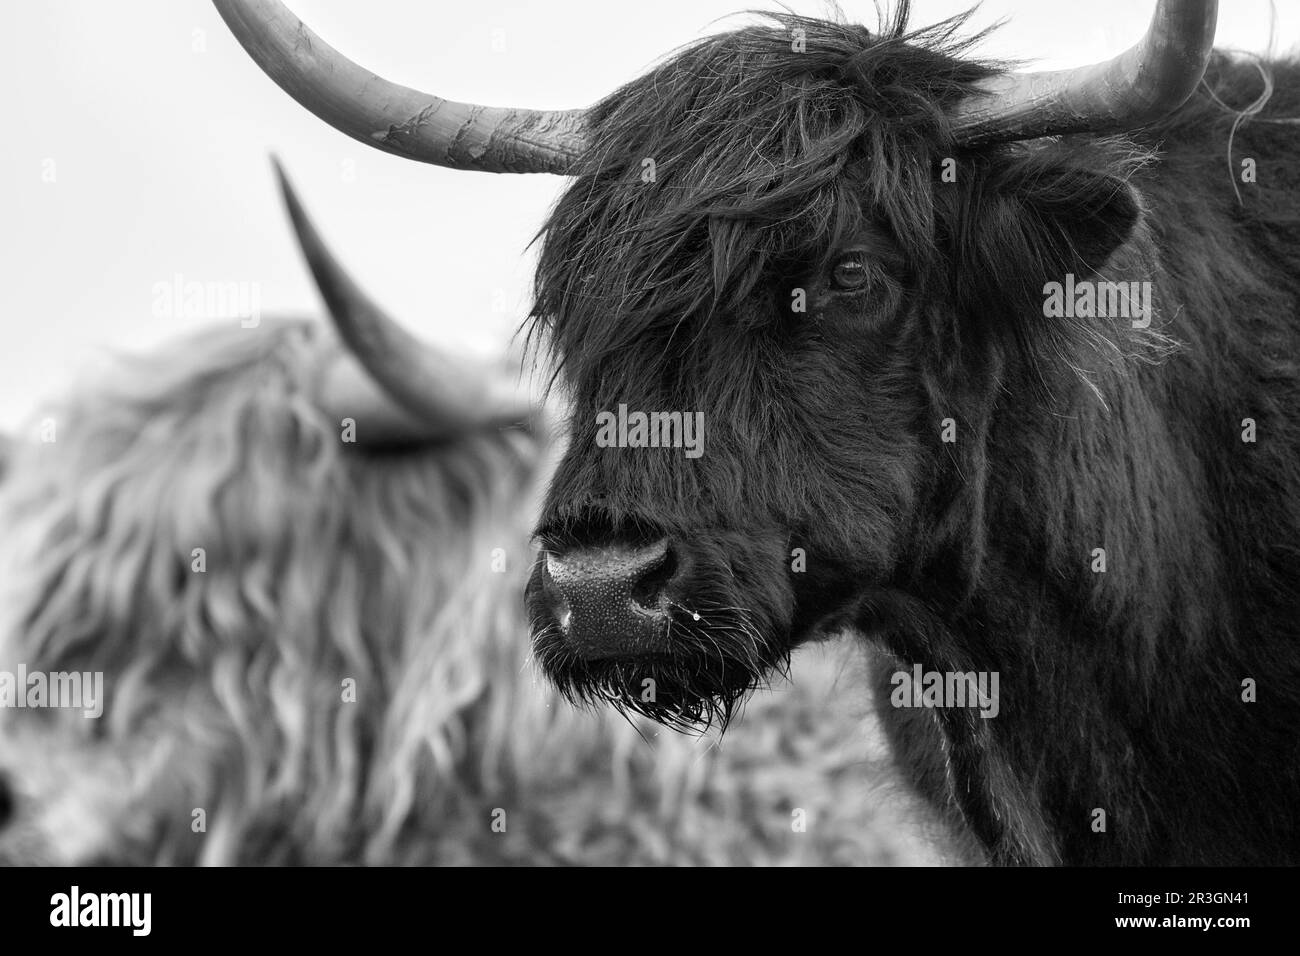 Scottish Highland Cattle (Bos primigenius f. taurus), Highland Cattle or Kyloe, black, head picture, monochrome, Isle of Lewis and Harris, Outer Stock Photo